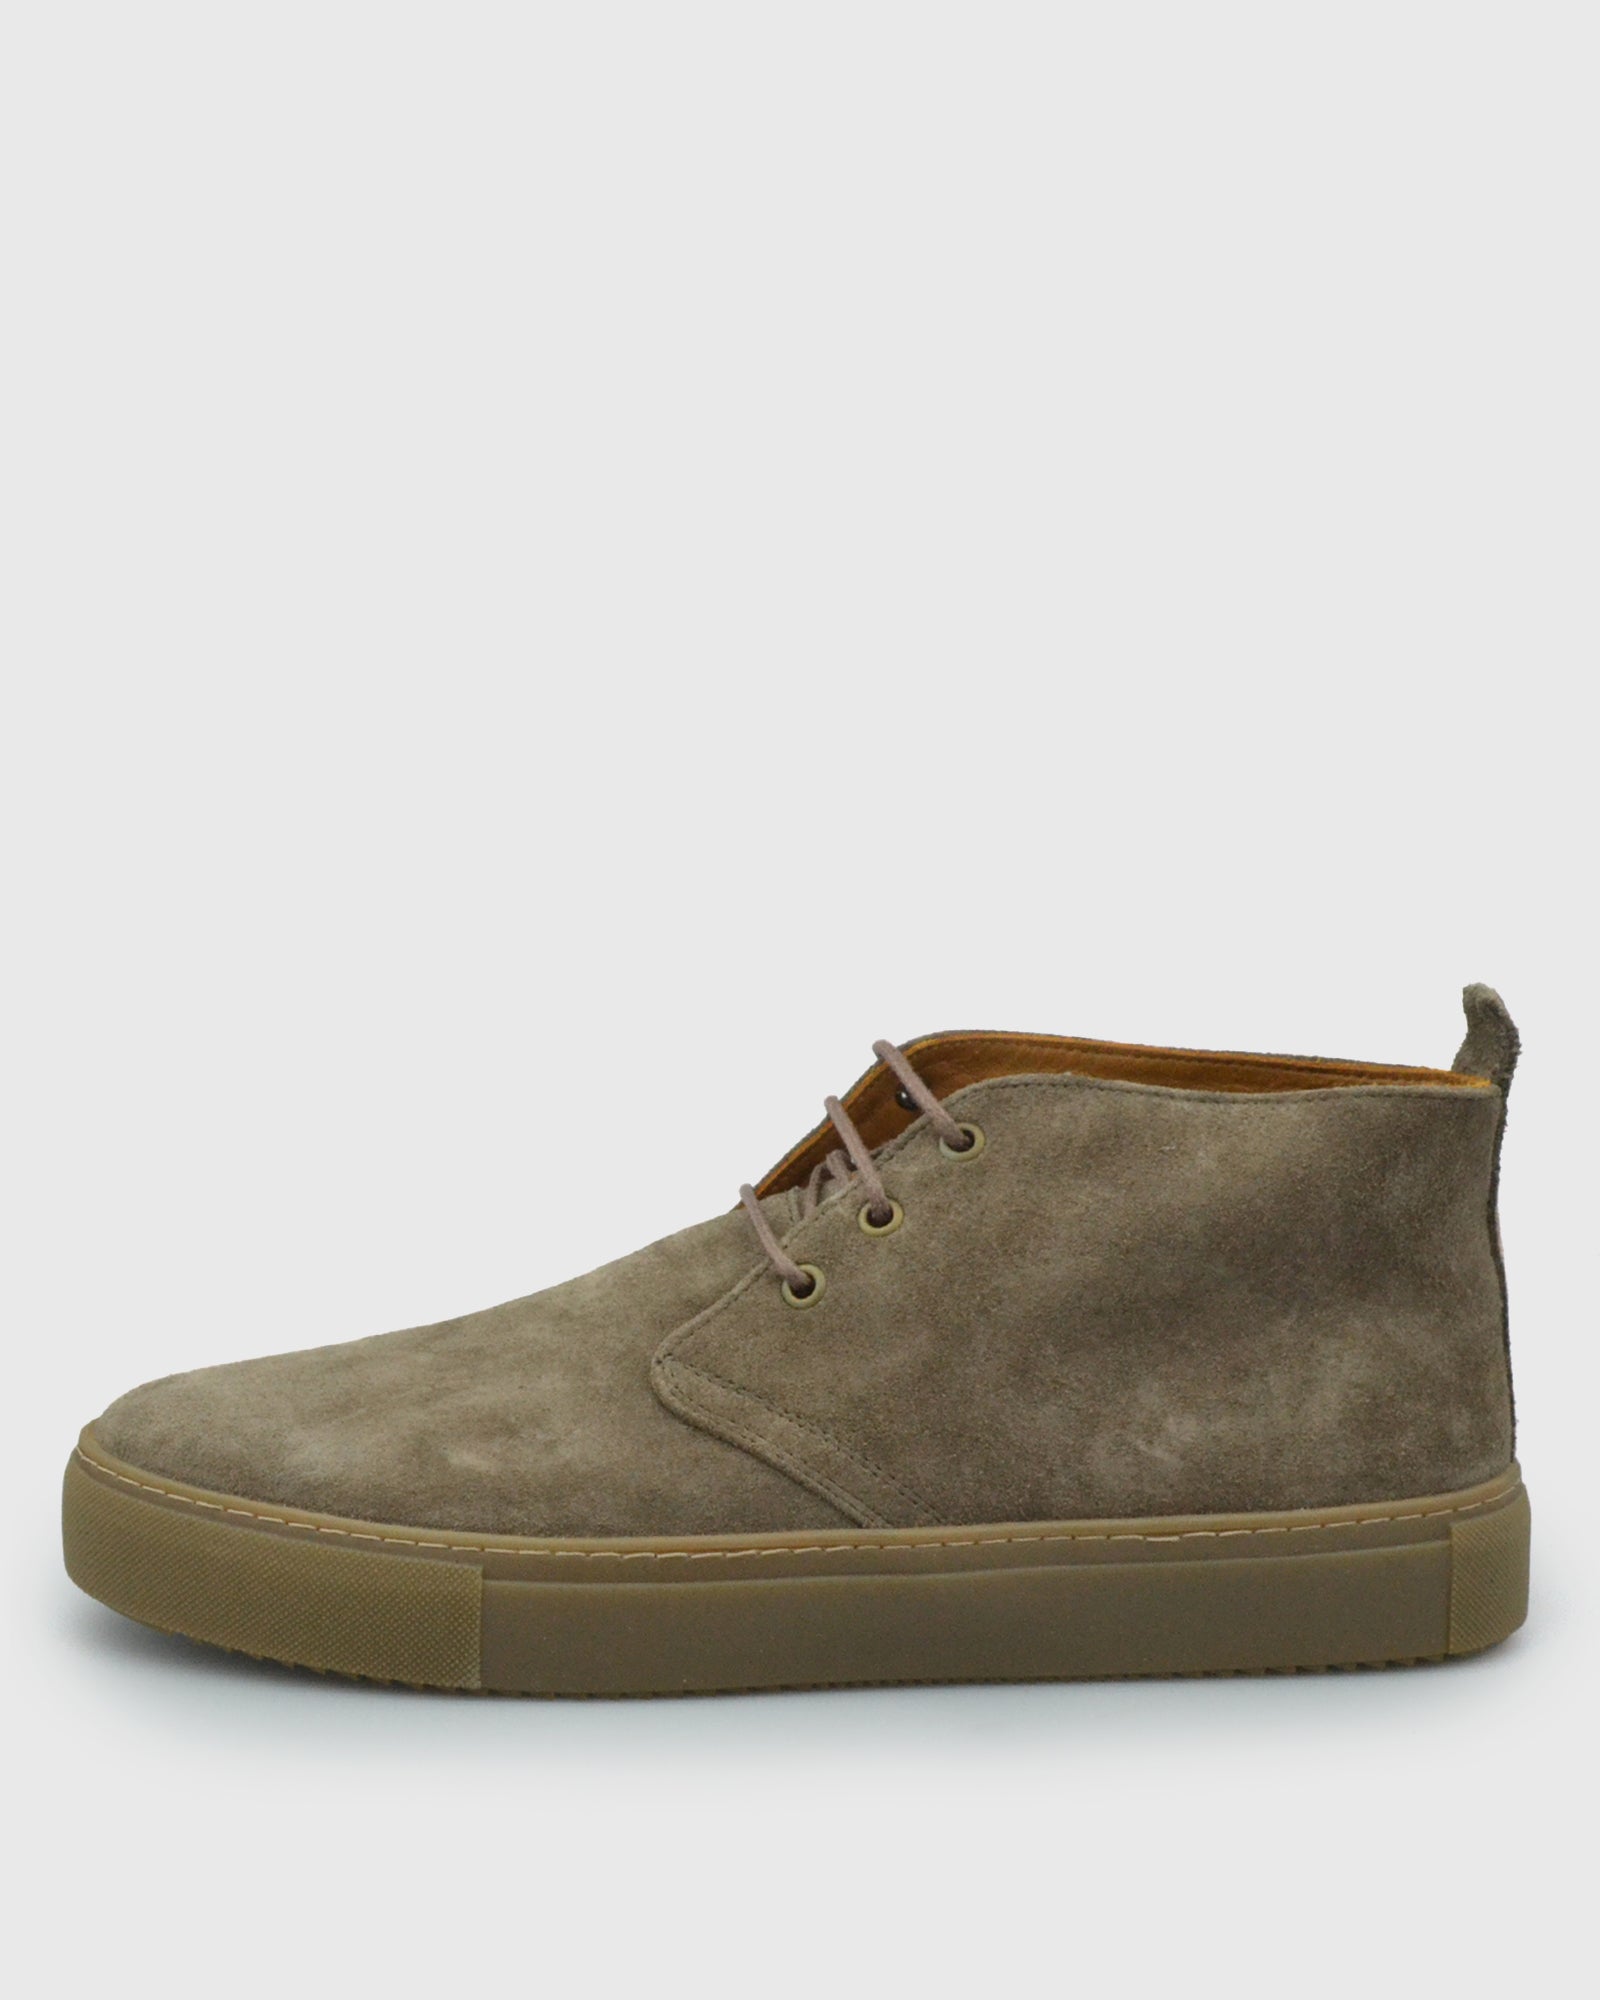 VINCENT & FRANKS VFW22 SUEDE TAUPE HIGH-TOP BOOT